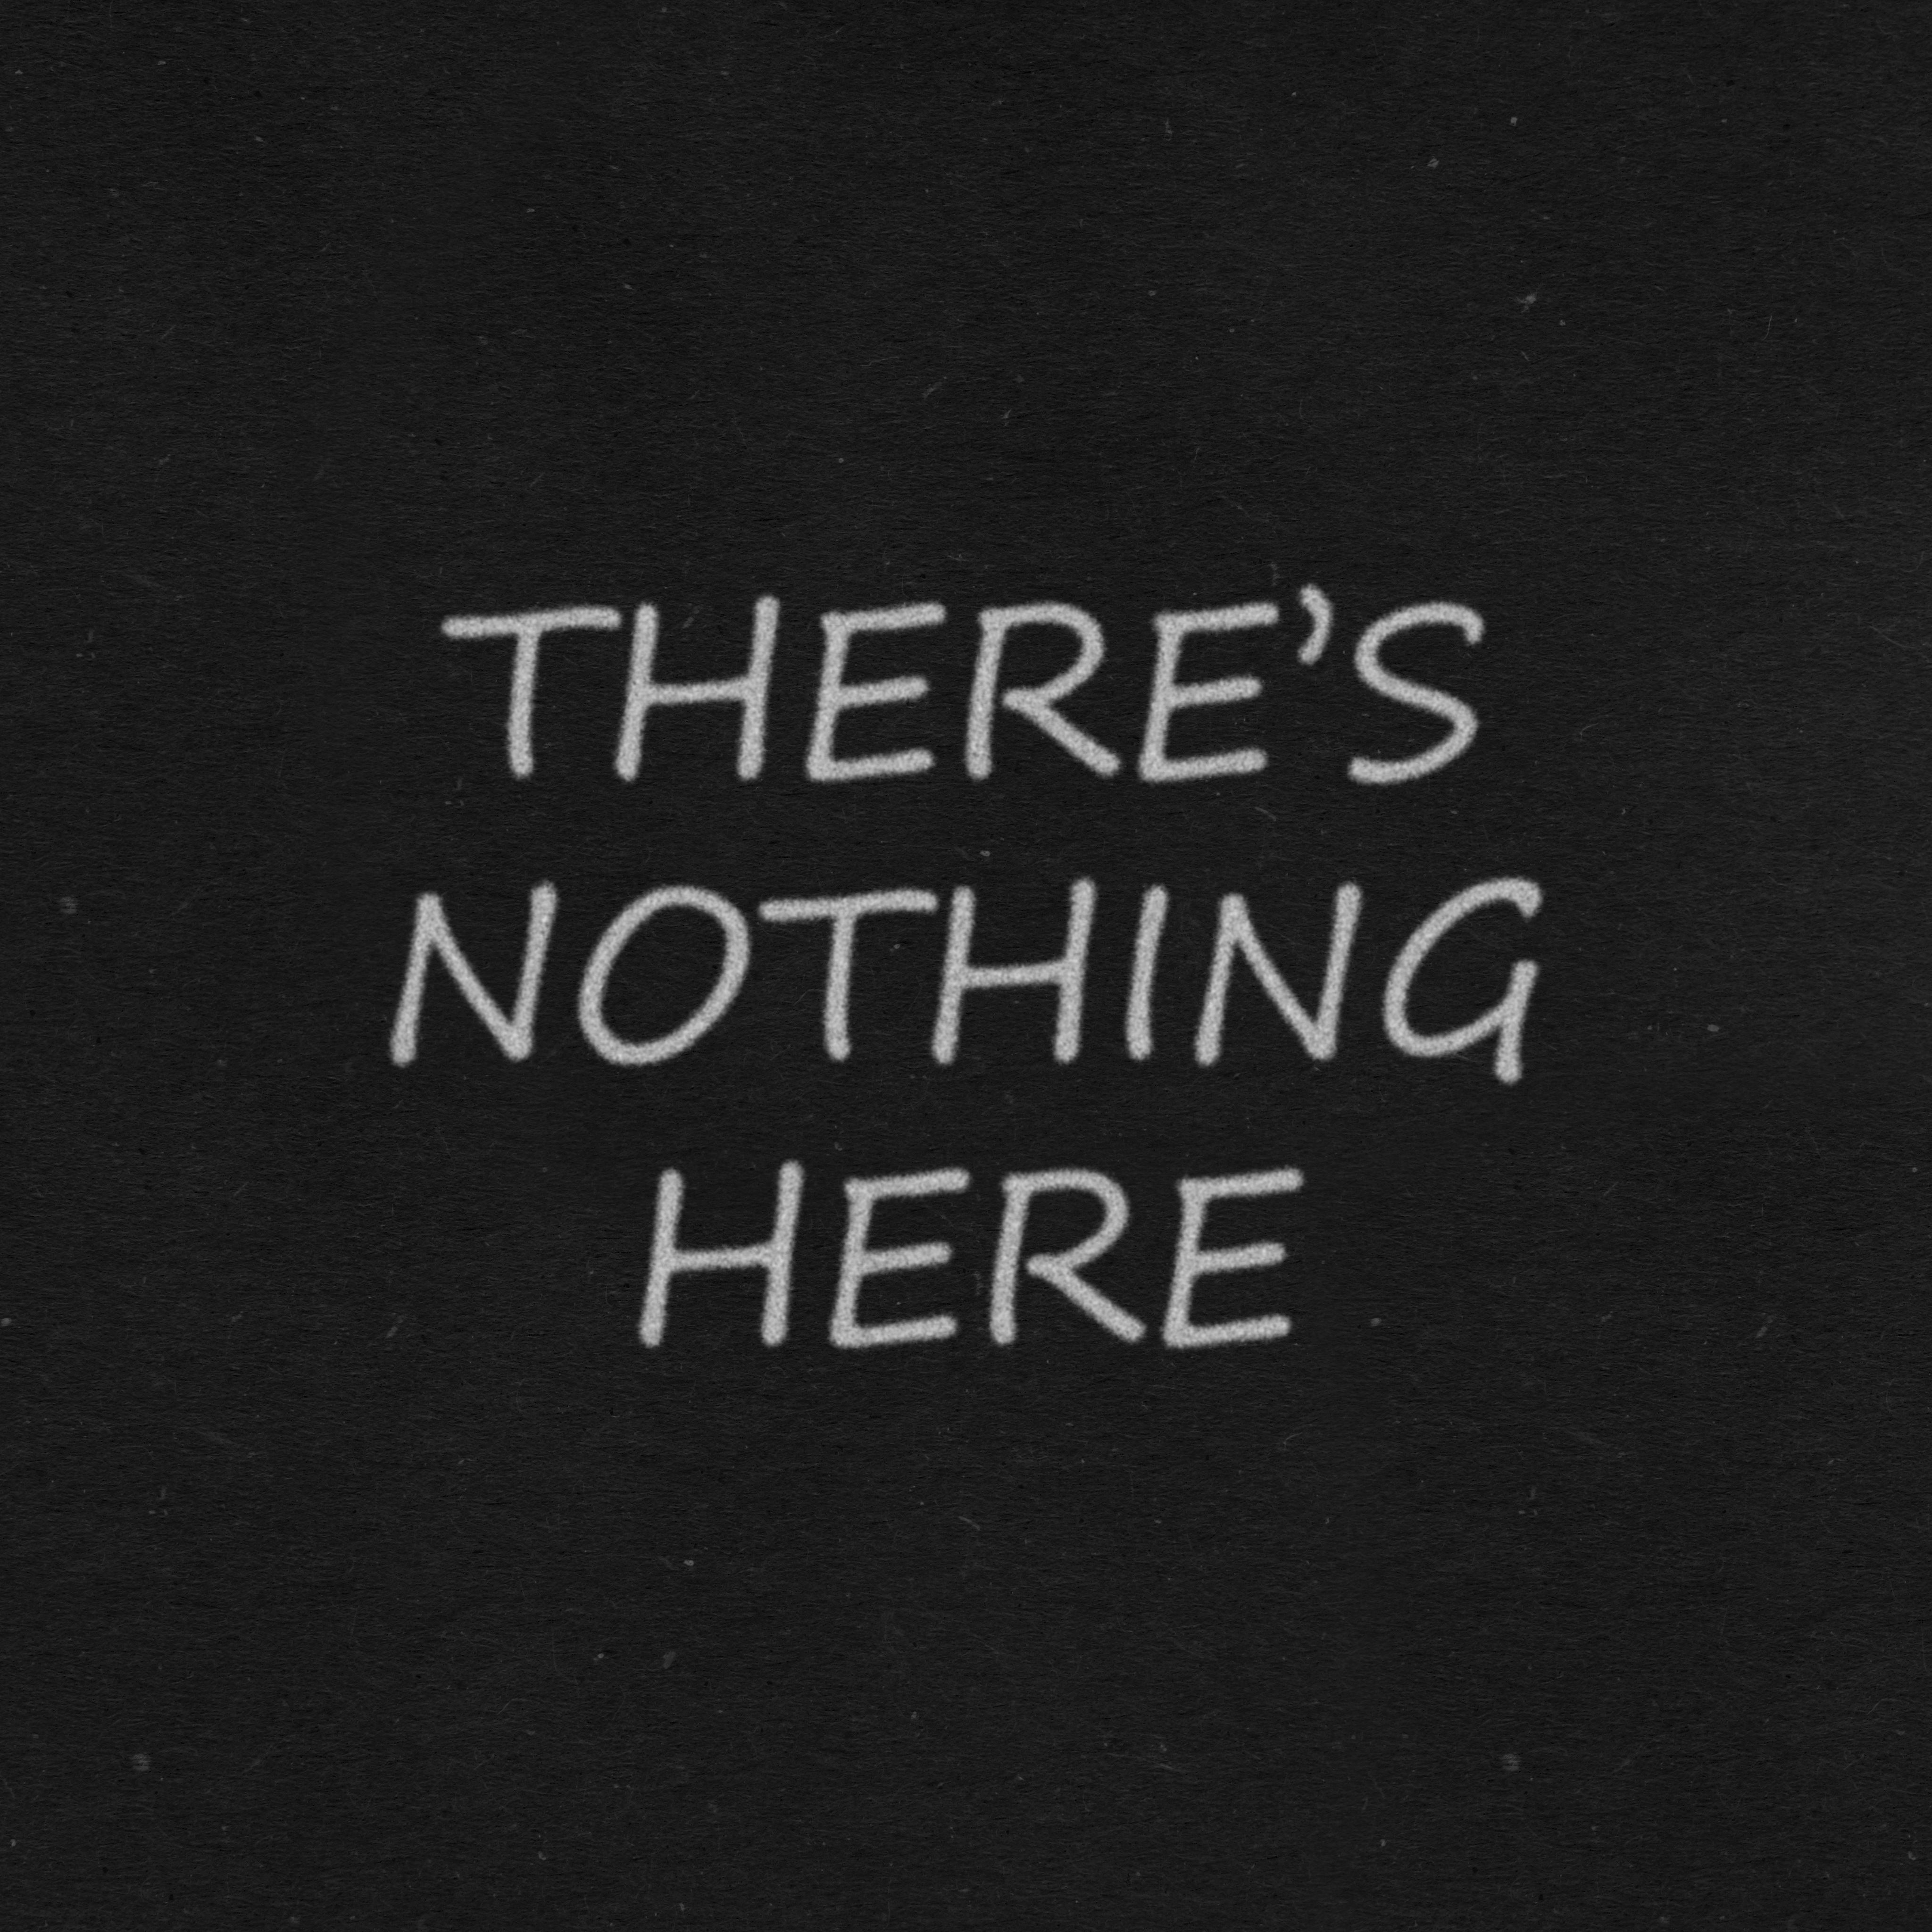 There's nothing here